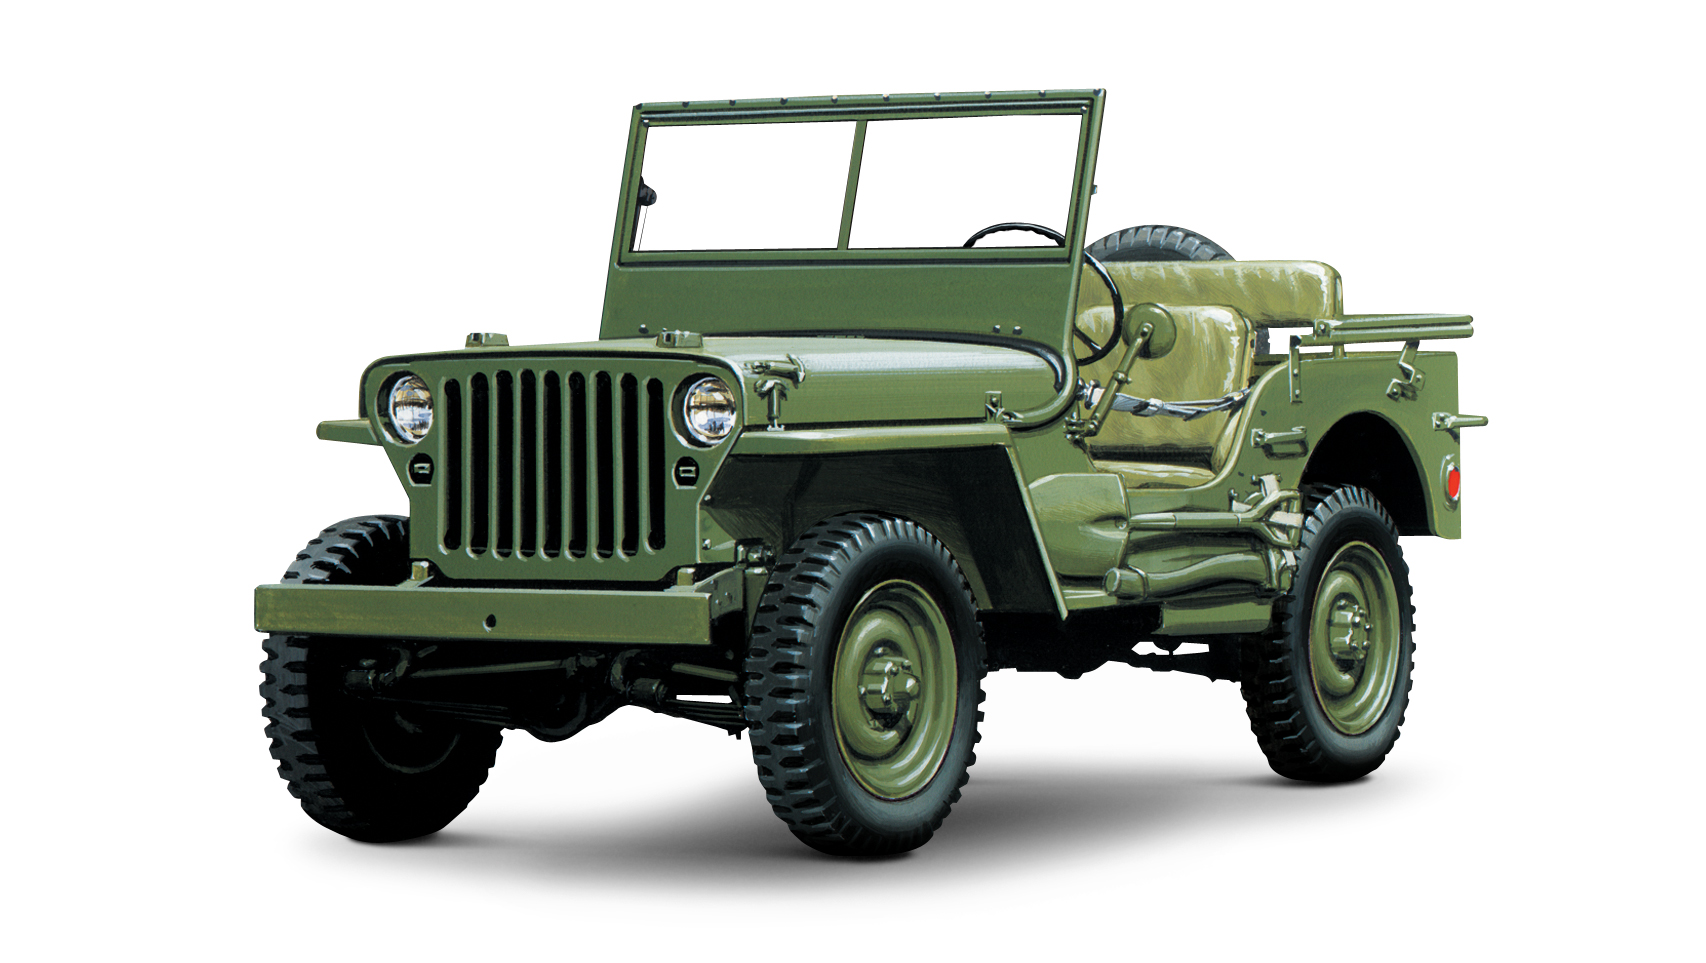 How the military jeep became today’s Jeep Wrangler